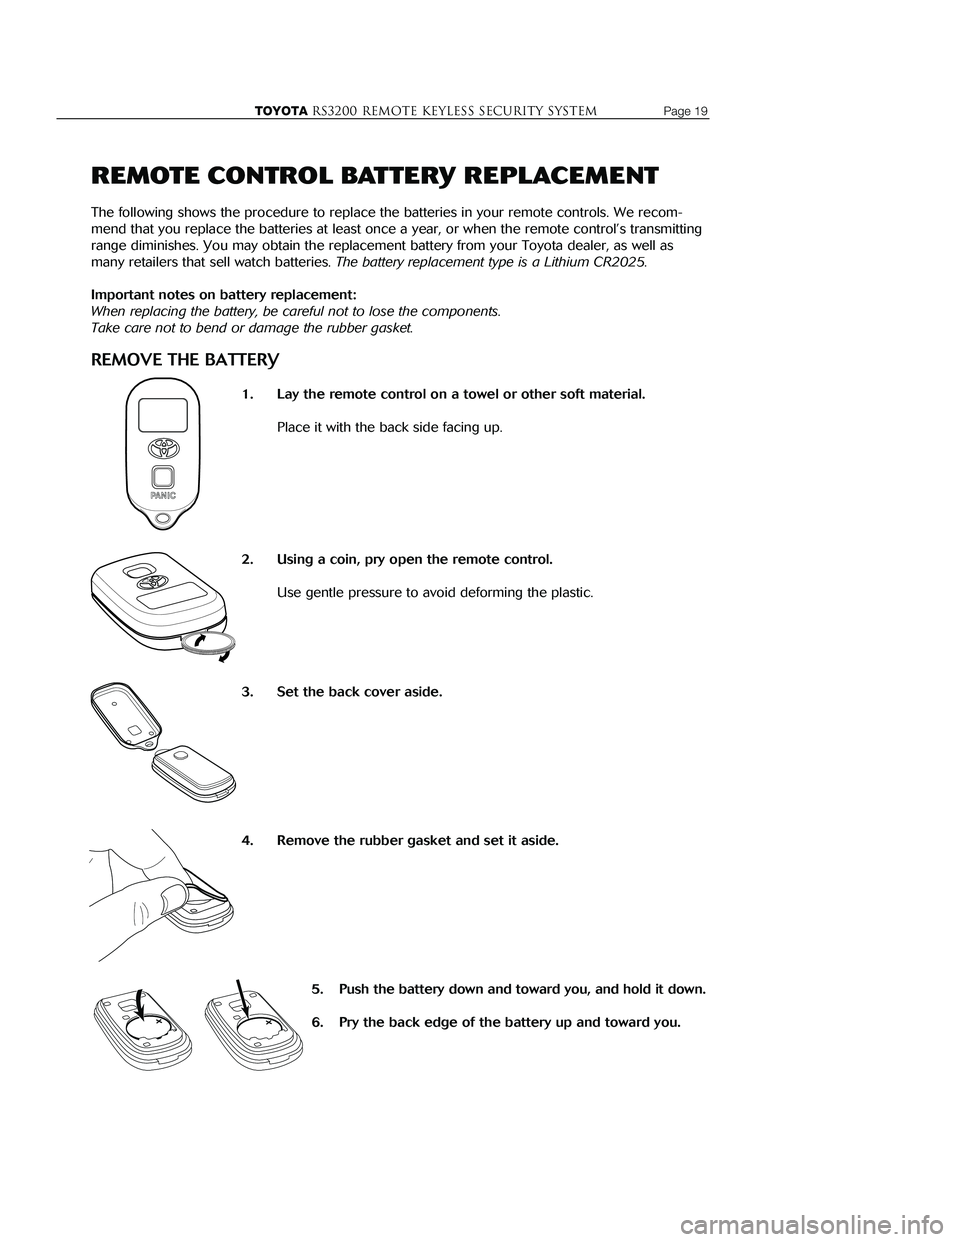 TOYOTA MR2 SPYDER 2001  Accessories, Audio & Navigation (in English) 
TOYOTARS3200 remote keyless Security systemPage 19
REMOTE CONTROL BATTERY REPLACEMENT
The following shows the procedure to replace the batteries in your remot\
e controls. We recom-
mend that you rep